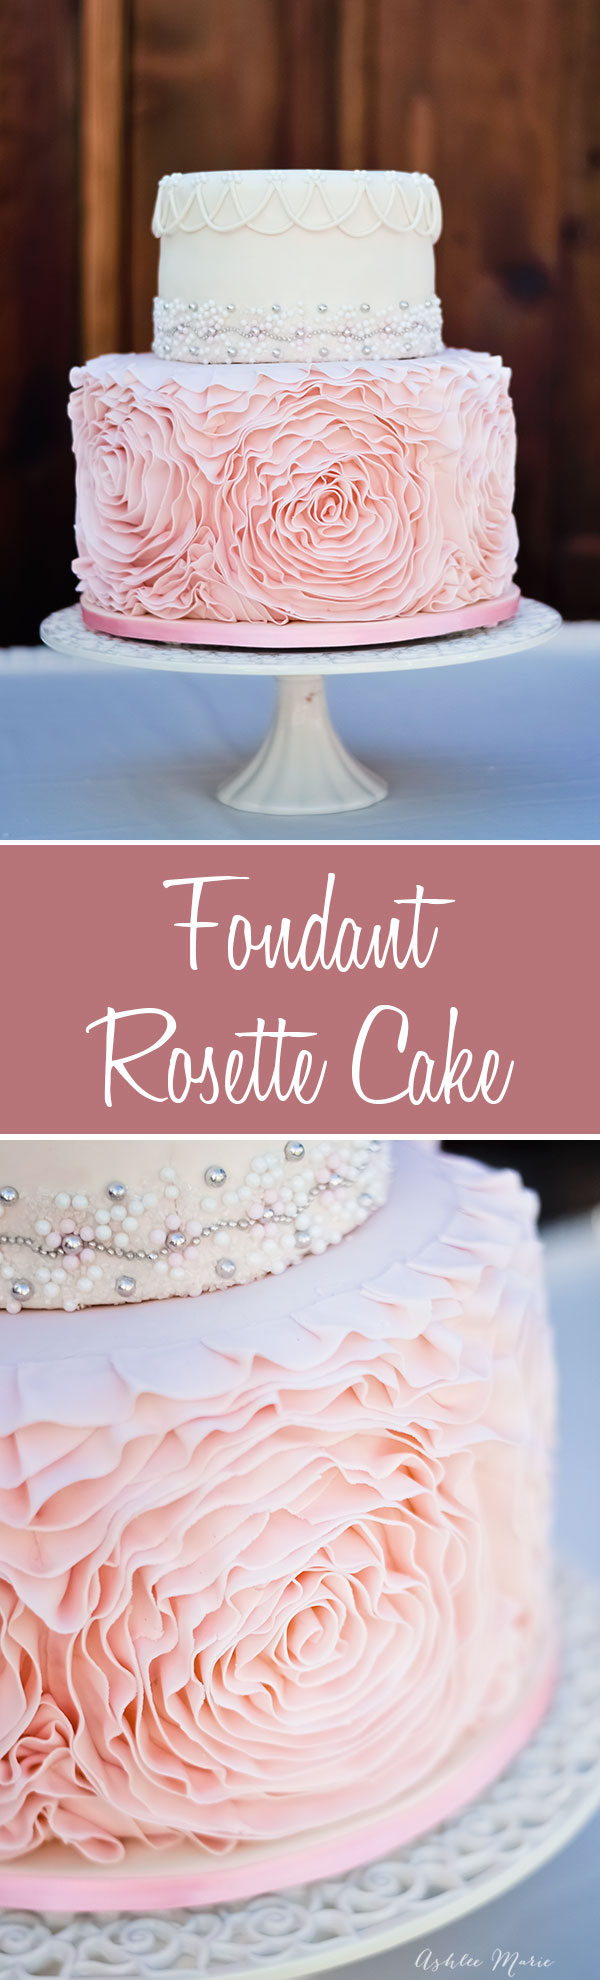 a small wedding cake, the bottom tier is covered in rounds of thin gumpaste ruffles in the shape of a rosette, the top tier is decorated to look like the jeweled belt of the brides dress